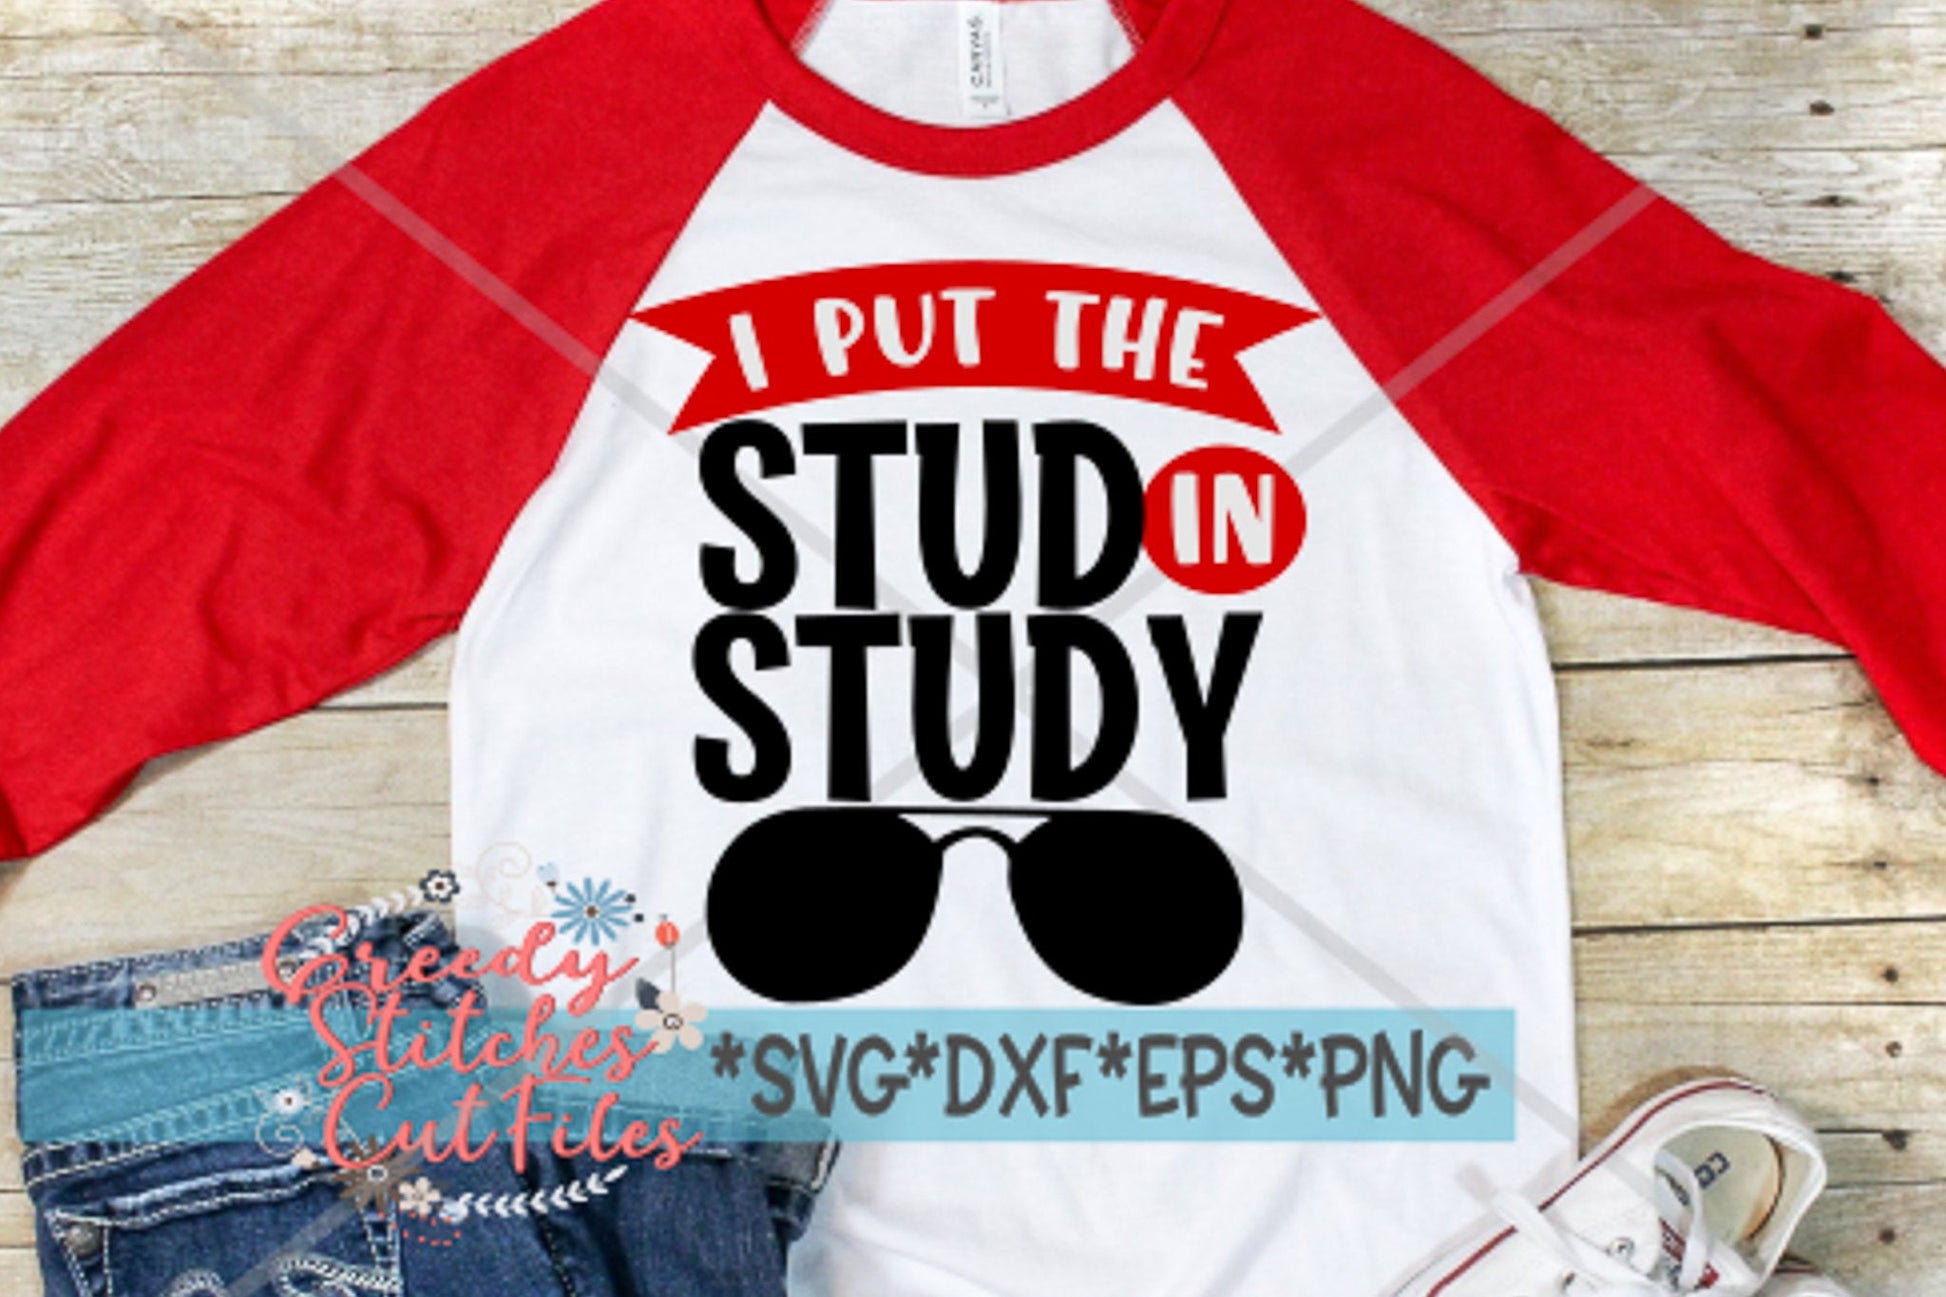 School SVG | I Put The Stud In Study svg, dxf, eps, png. I Put The Stud In Study SVG DxF | School SVG | Stud SvG |Instant Download Cut Files